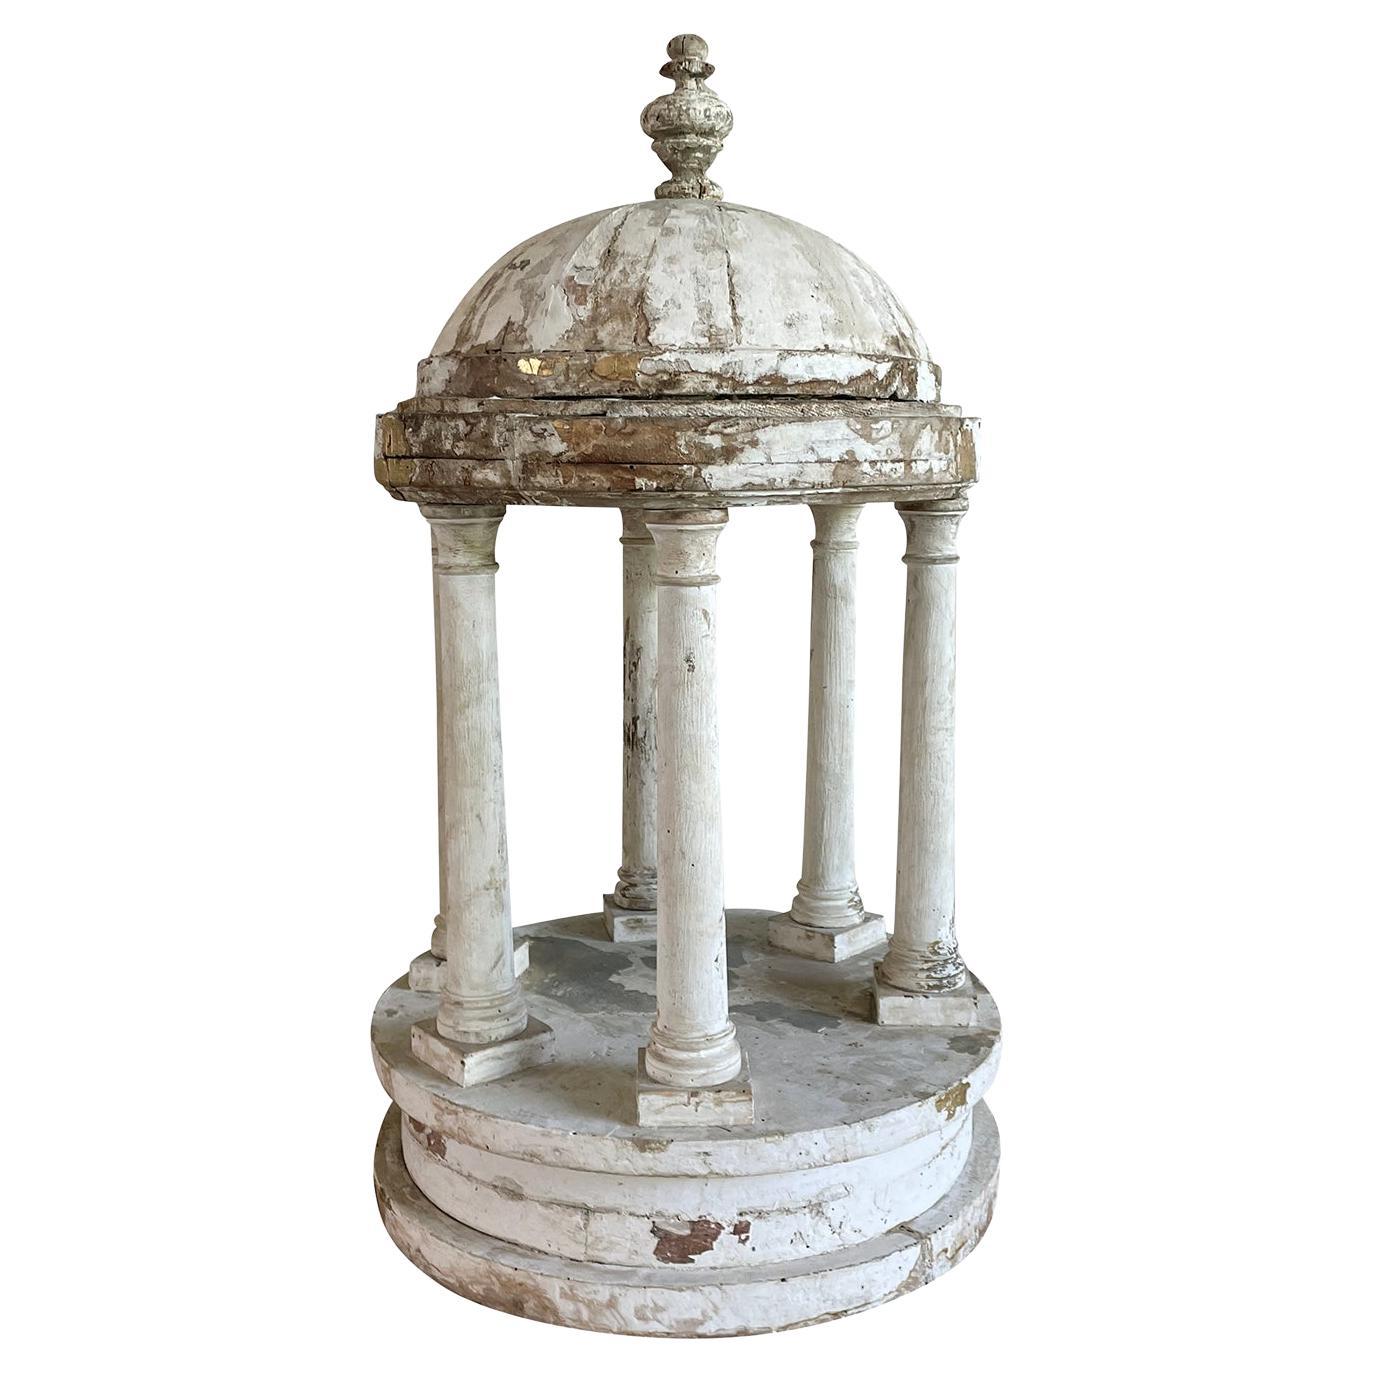 19th Century White-Grey French Pinewood Model Pavilion, Antique Décor